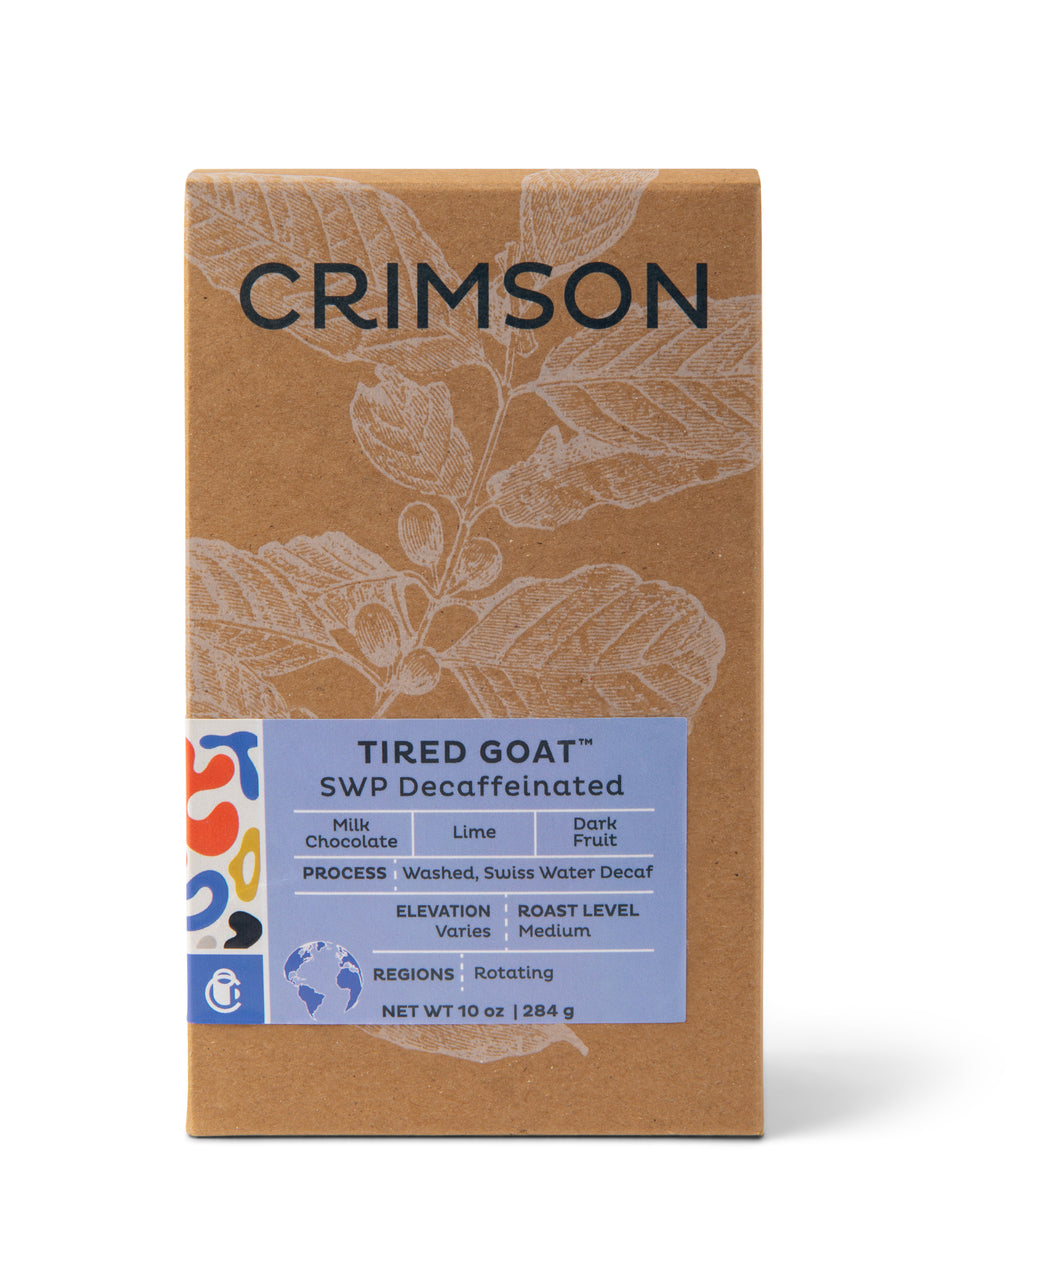 Tired Goat Blend, SWP Decaf